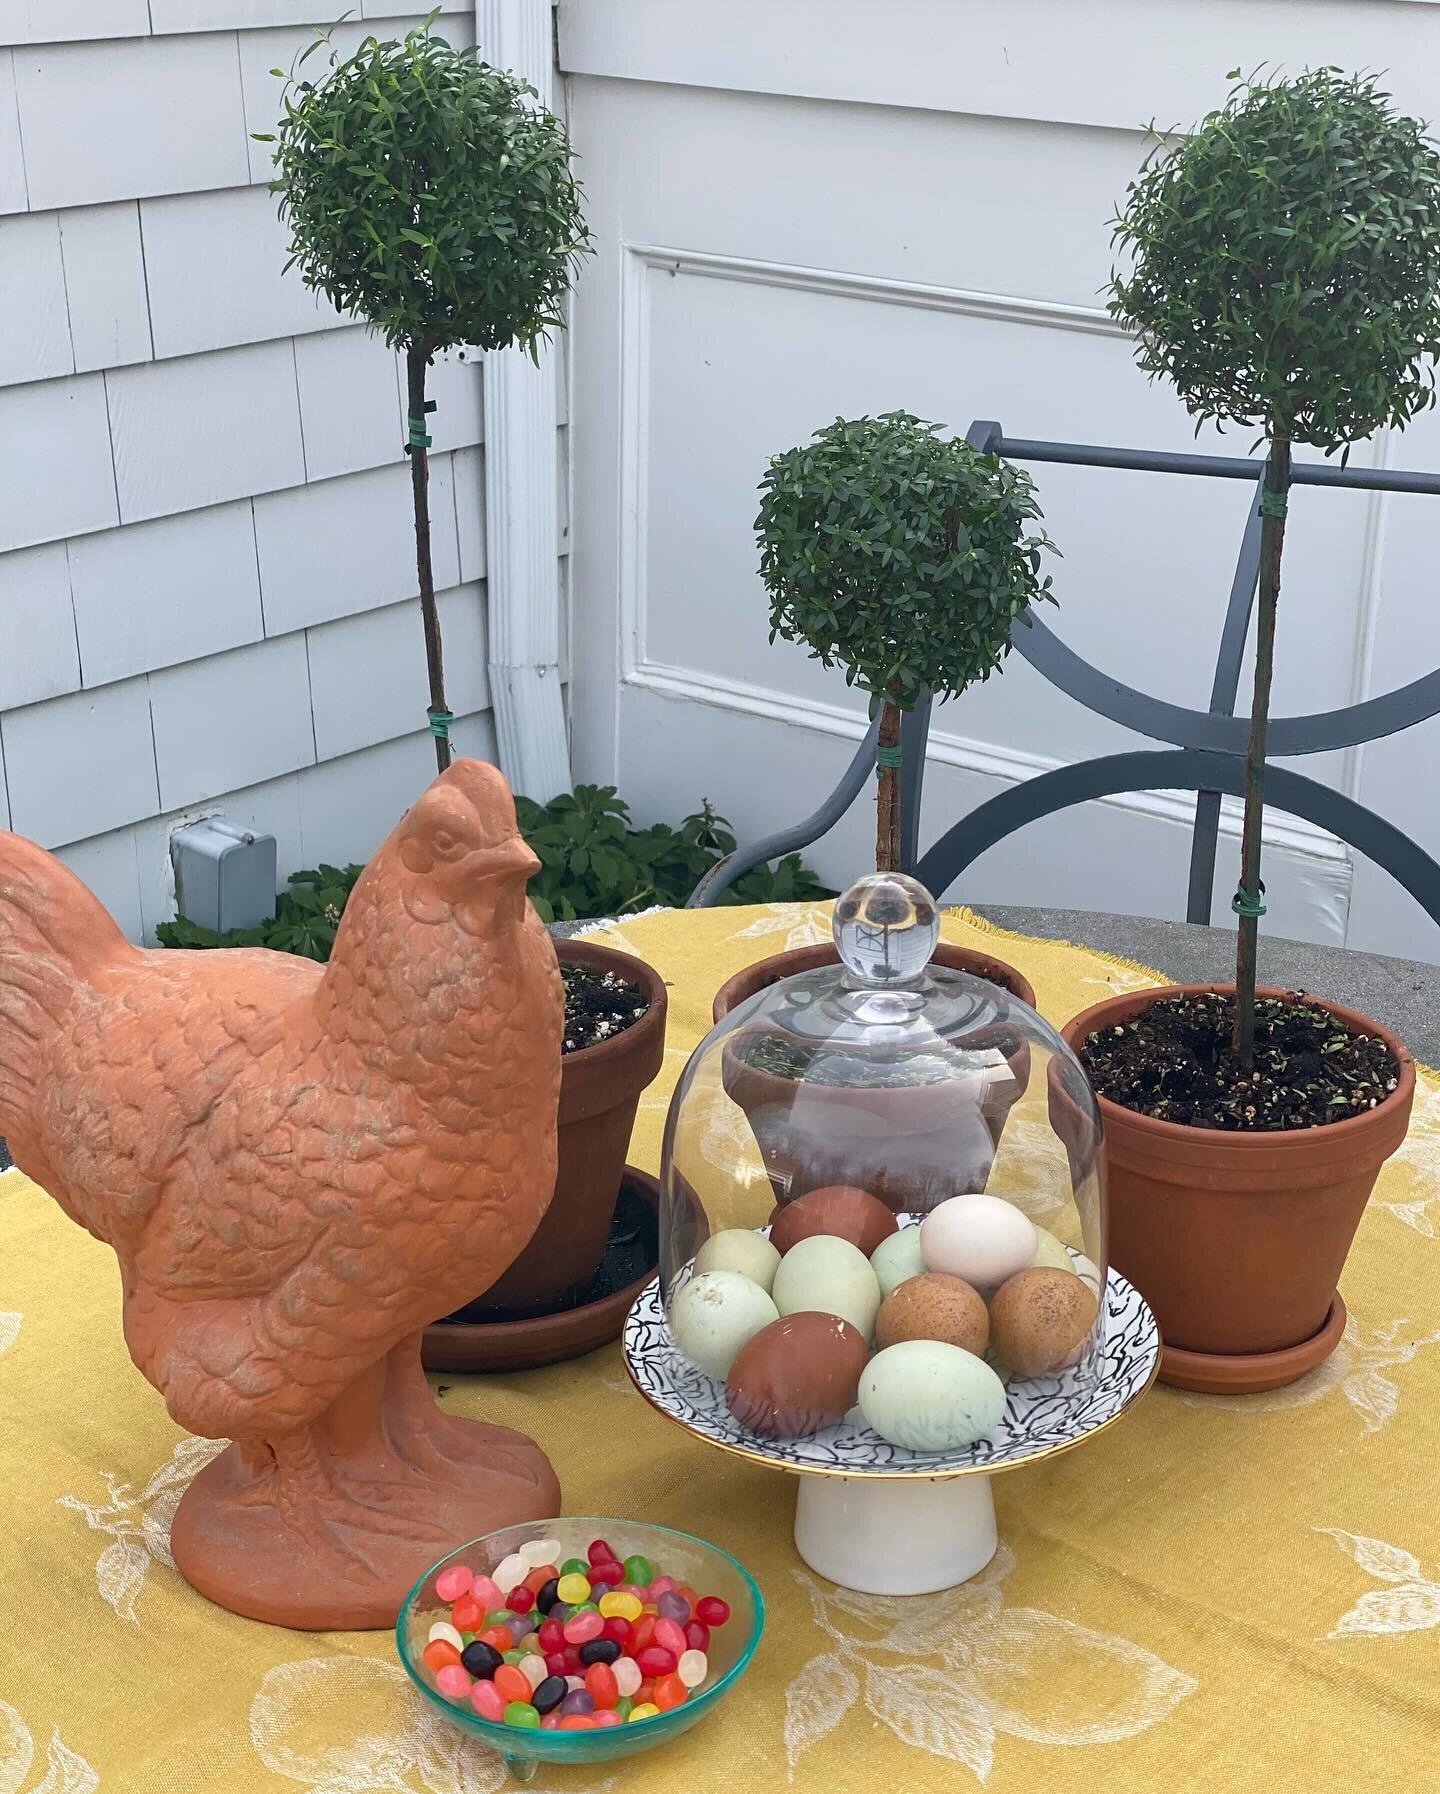 Happy Easter Sunday☀️🐣 to all who celebrate! 
Fresh eggs undied by @thetodaros @giadablujewelry 
Wishing you a peaceful day with friends and family.
#easter #christian #spring #nature #organic #grateful #thankful #family #kindness #mindful